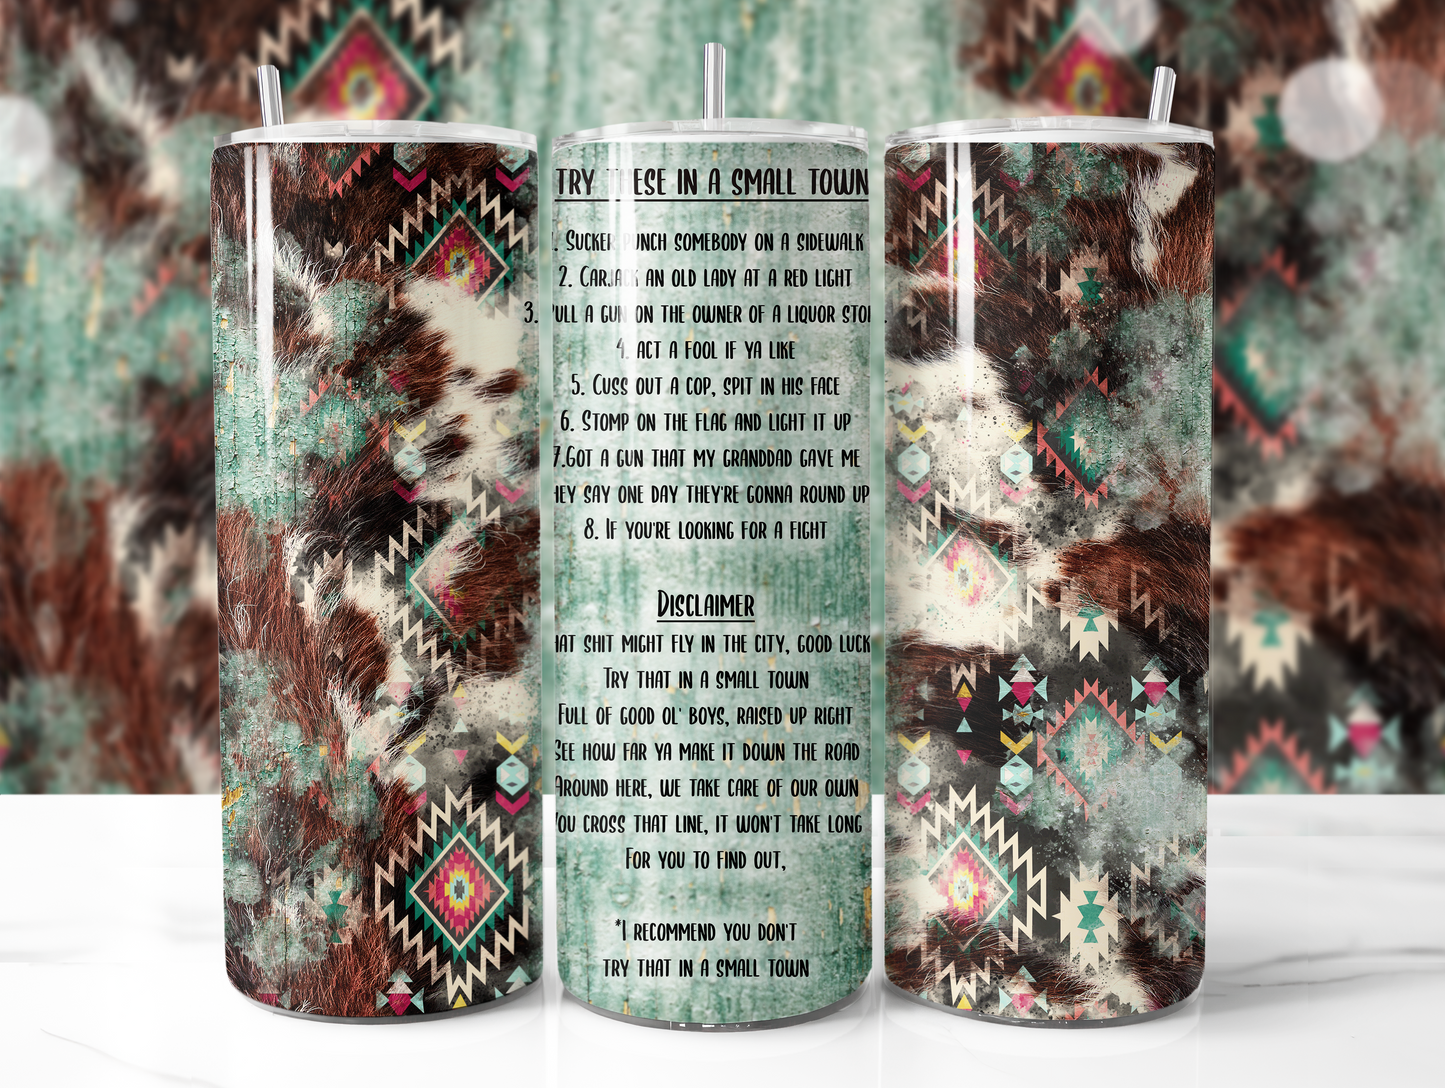 Jason Aldean's " Try That In a Small Town" Tumbler